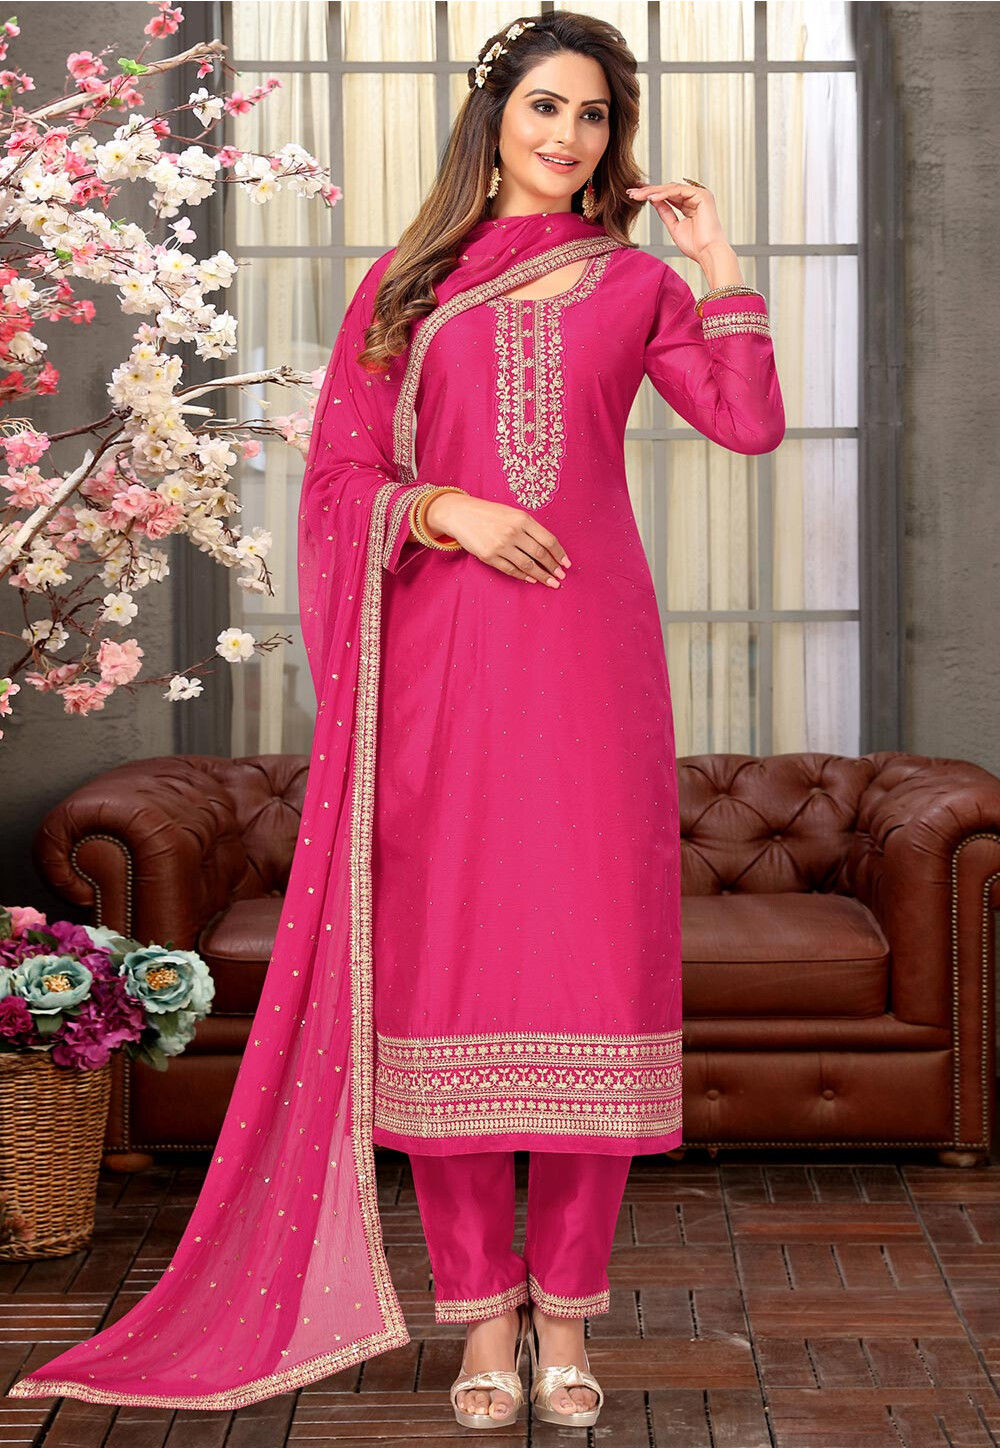 Buy Embroidered Art Silk Pakistani Suit in Pink Online : KGZT5205 ...